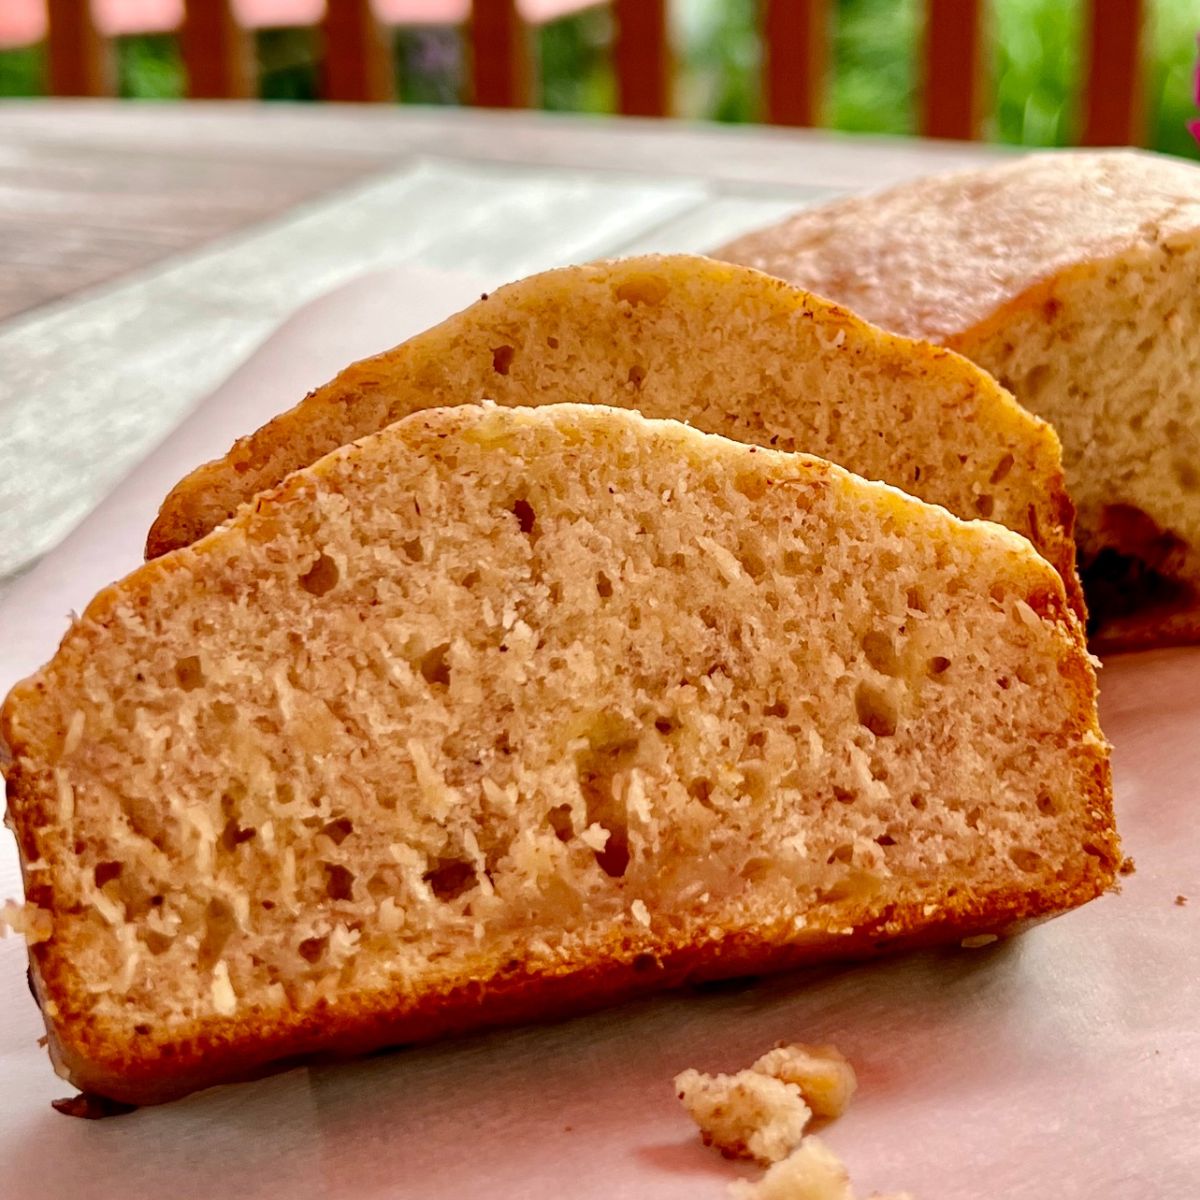 Slices of Banana Eggless Bread on a wooden picnic table